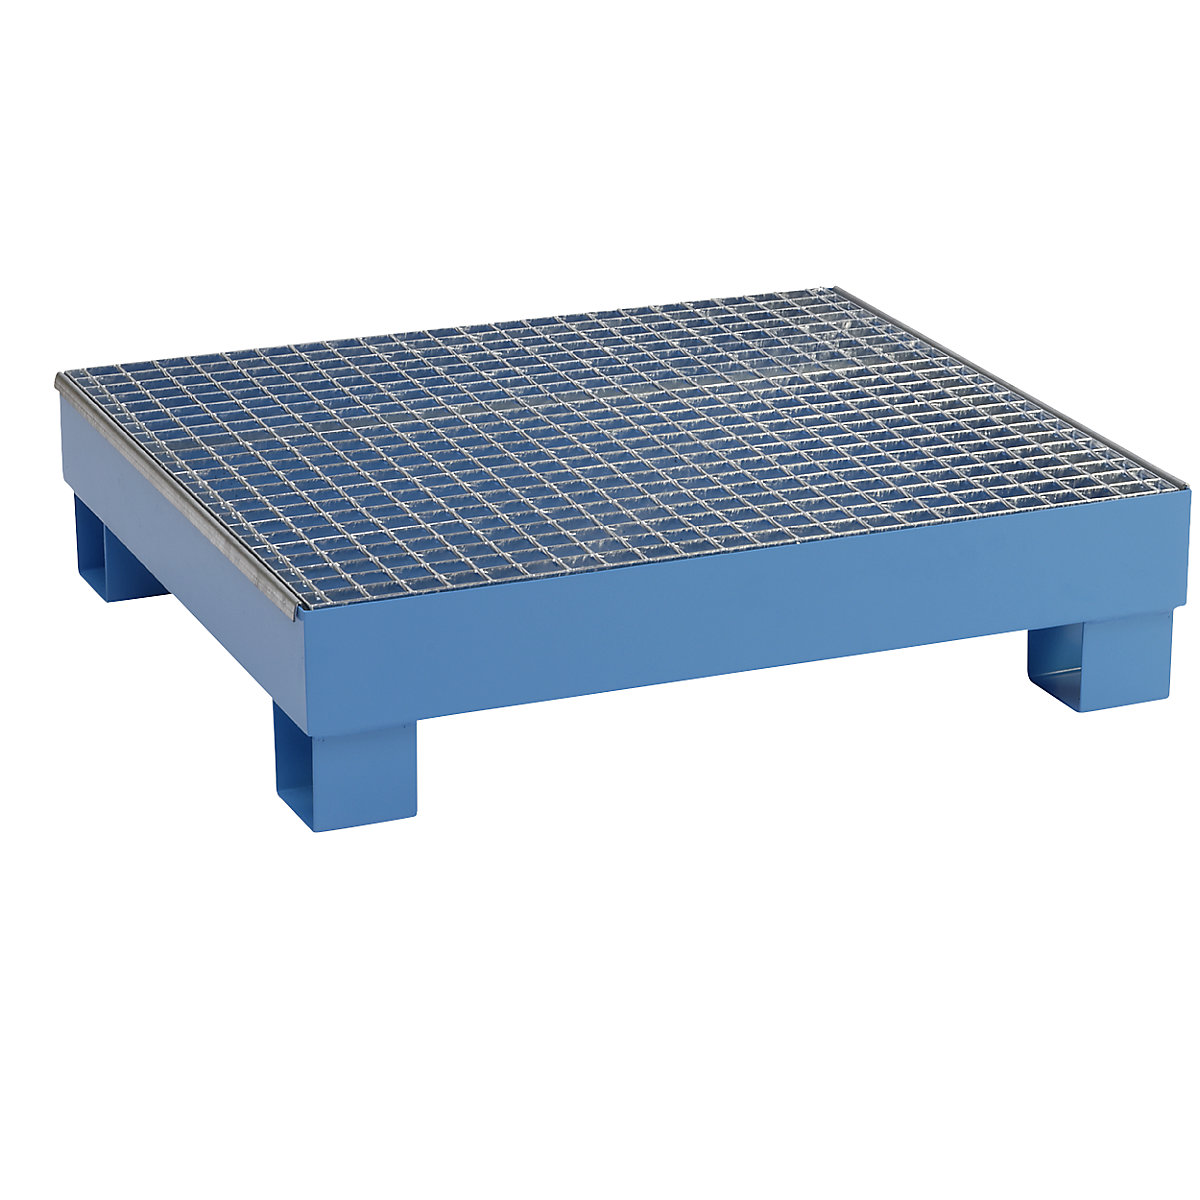 Sump tray for 60 l – eurokraft basic, LxWxH 800 x 1300 x 205 mm, with certification, powder coated blue, with grate-5